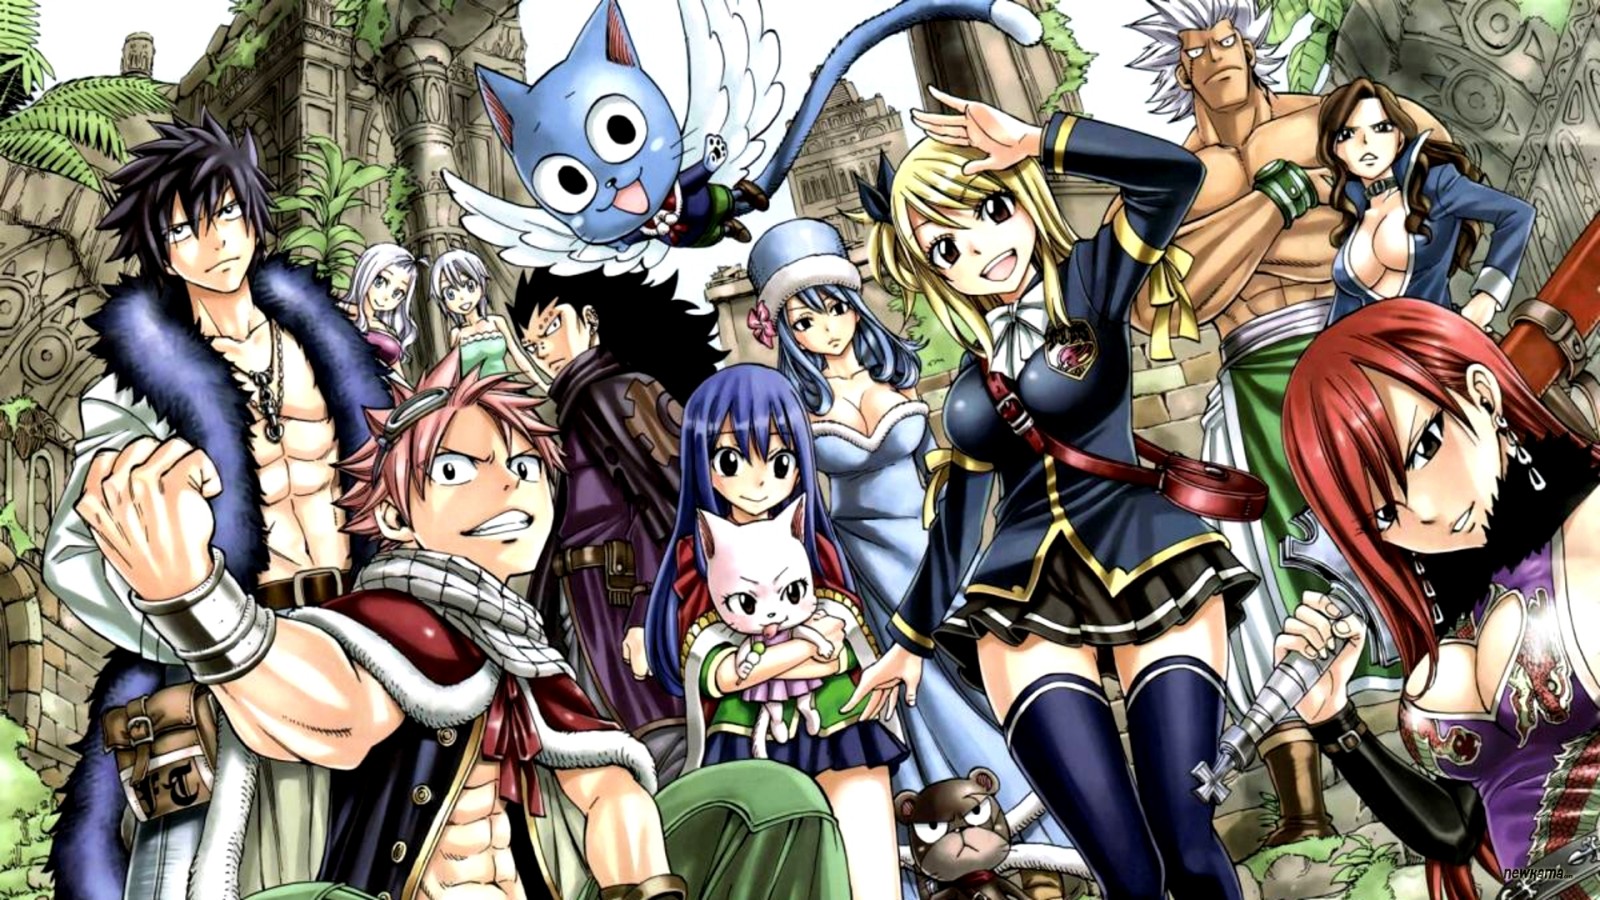 Fairytail wallpapers